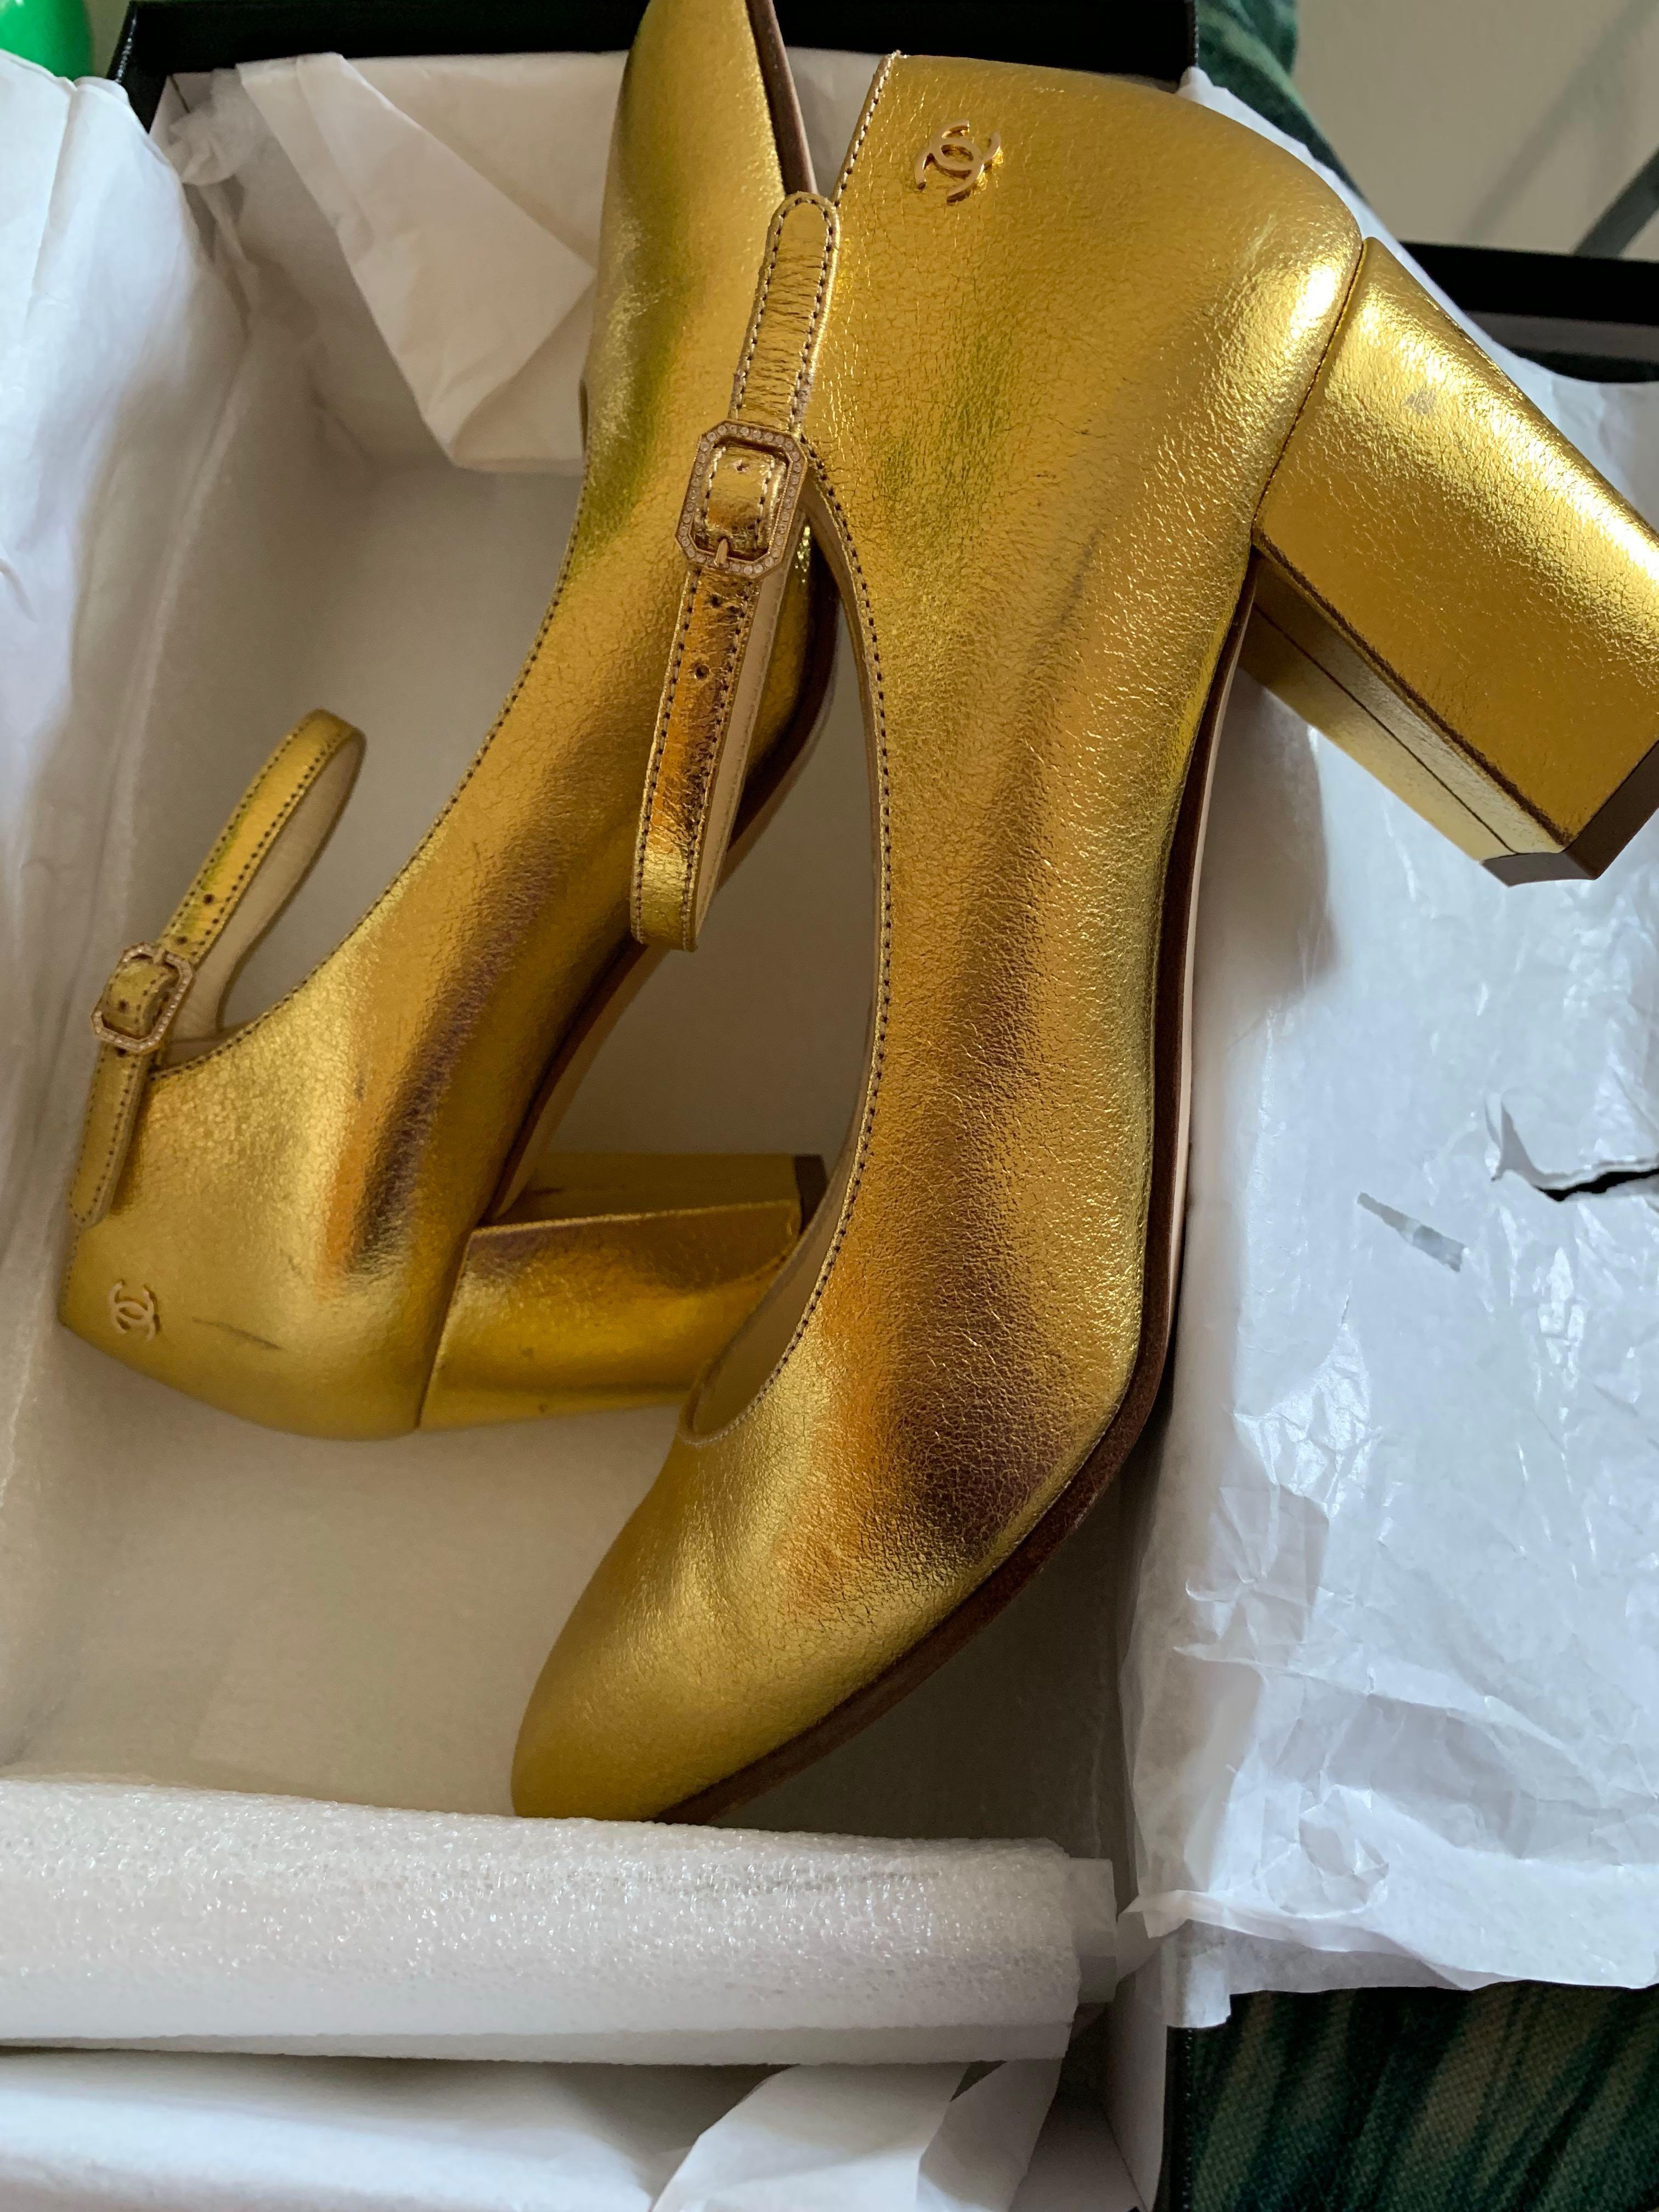 yellow gold pumps